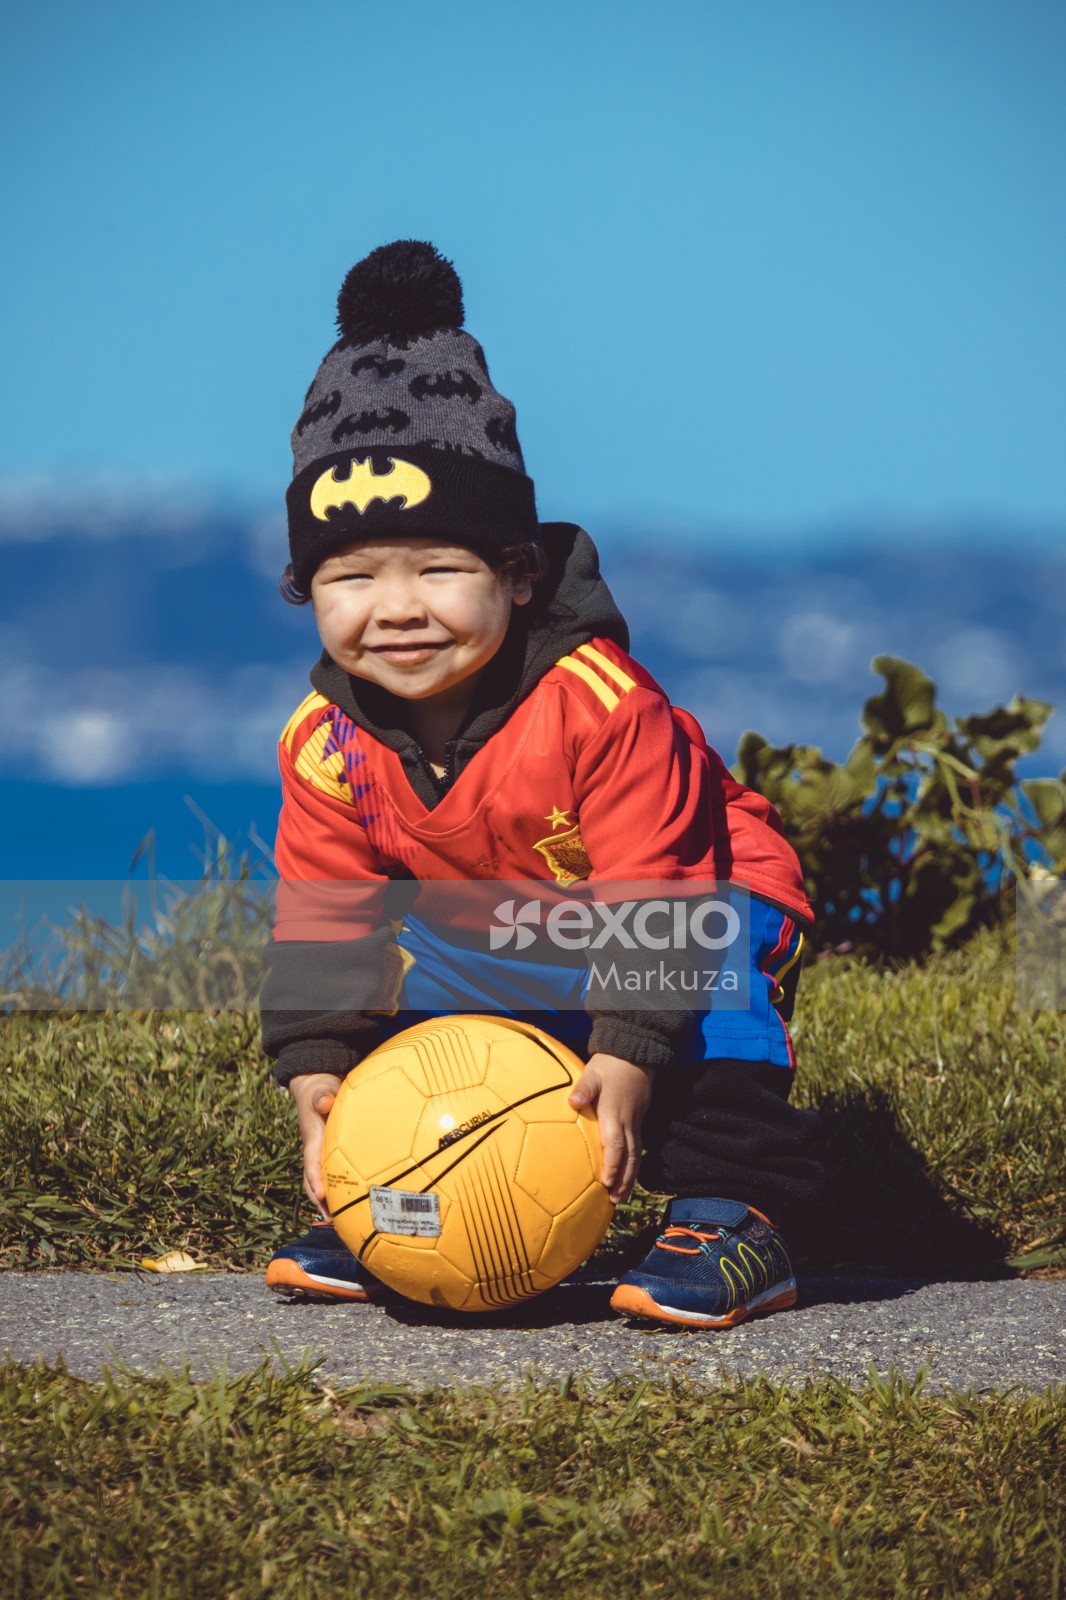 Kid in Manchester United kit and batman cap holding a yellow football - Little Dribblers